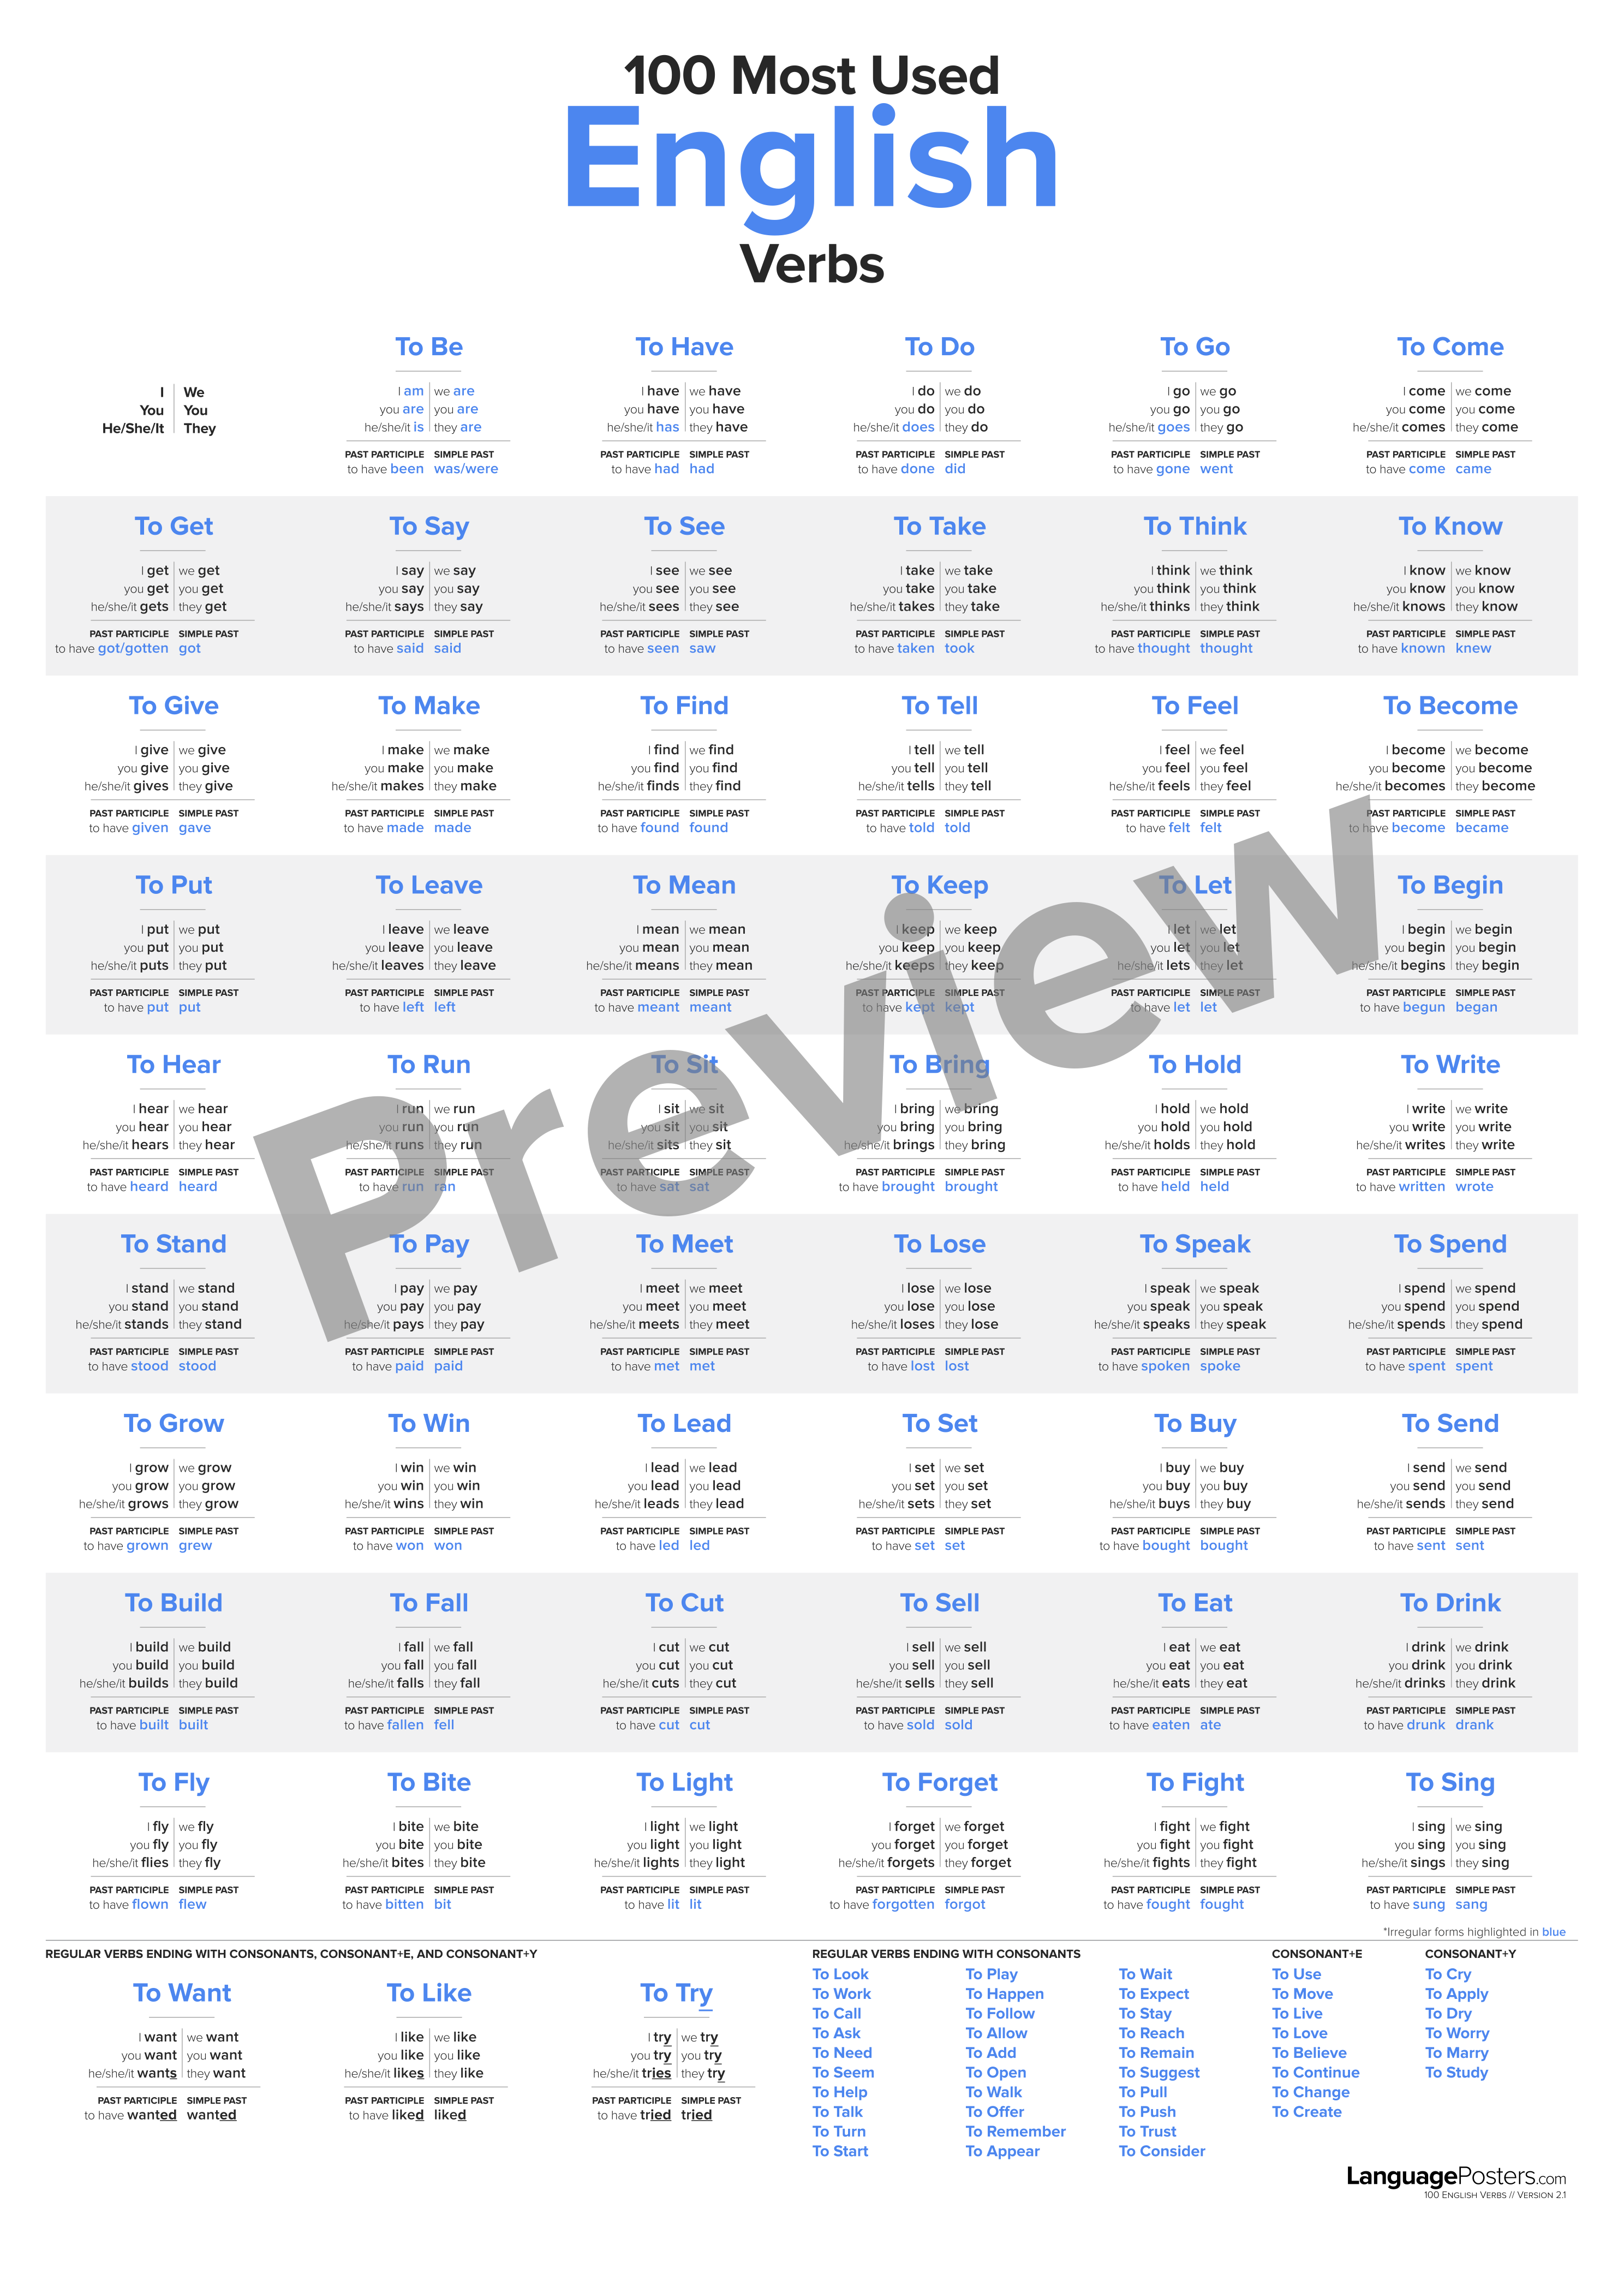 100 Most Used English Verbs Poster Preview - LanguagePosters.com